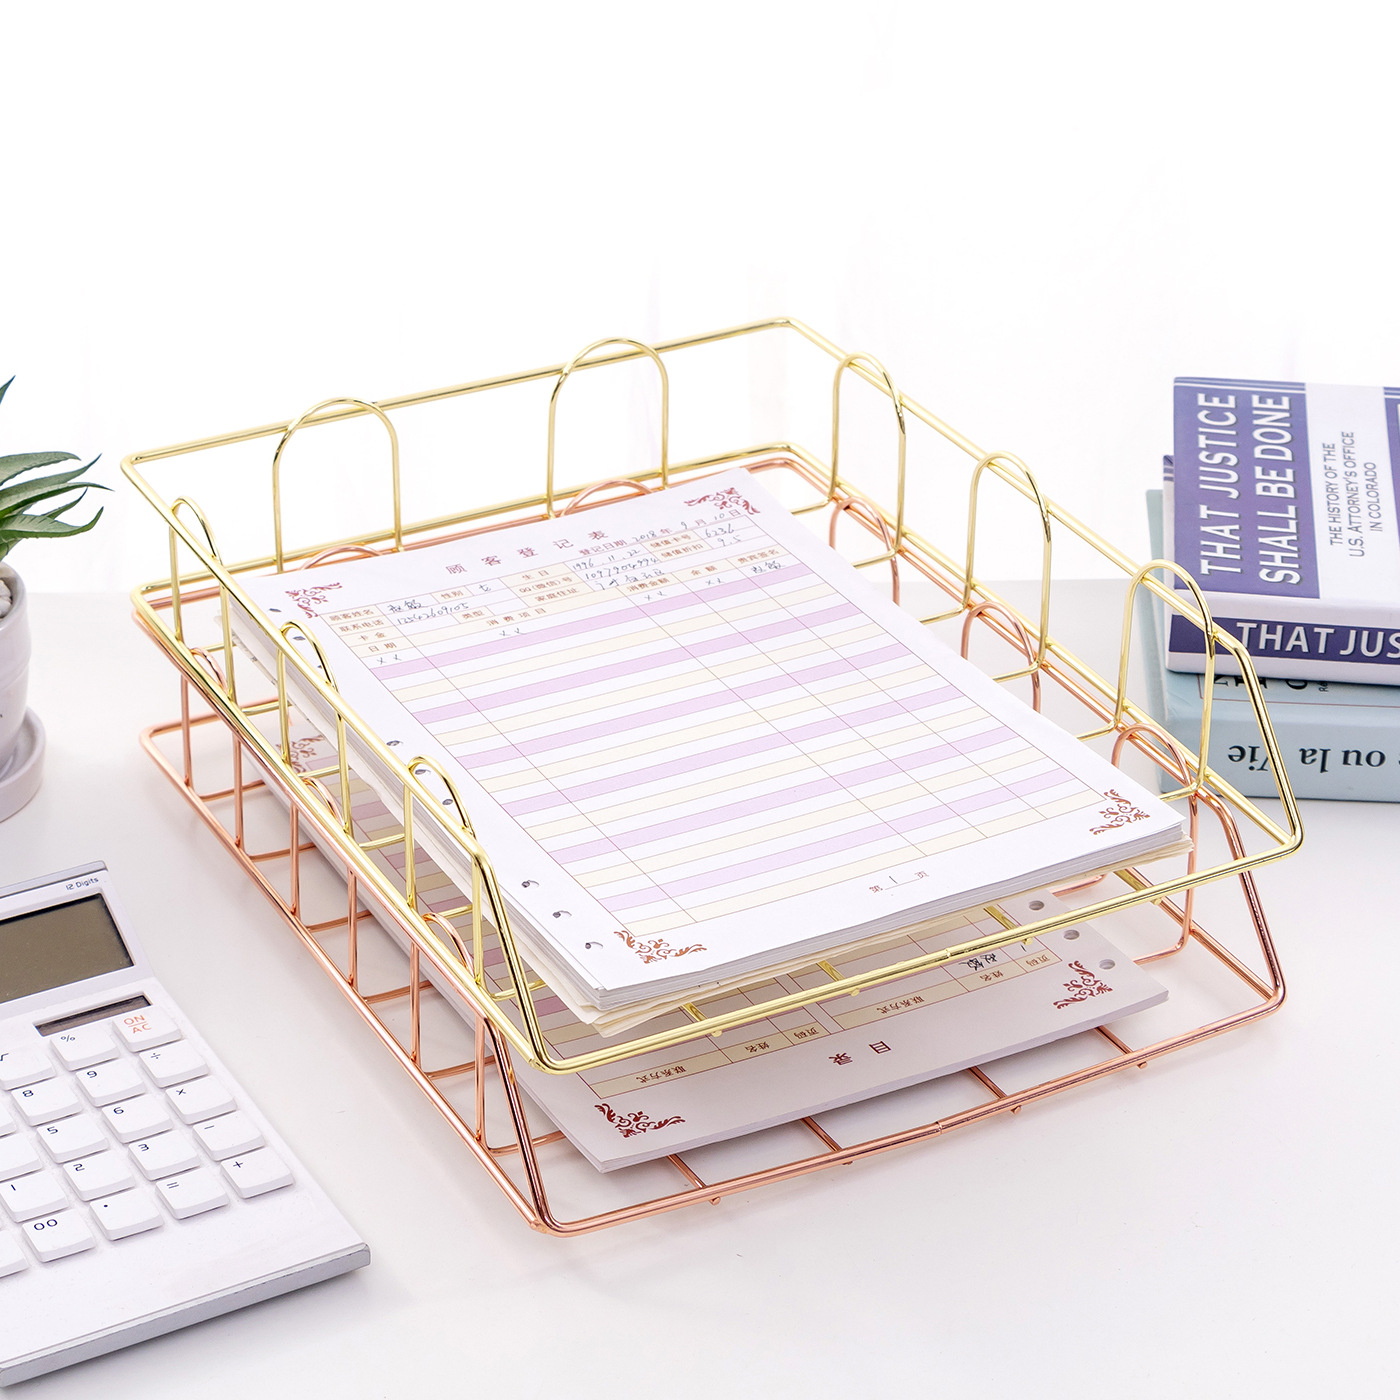 MingQiang-Single-layer-Stackable-File-Rack-Nordic-Style-Metal-Rack-Desktop-Organizer-Home-Office-Des-1692195-5